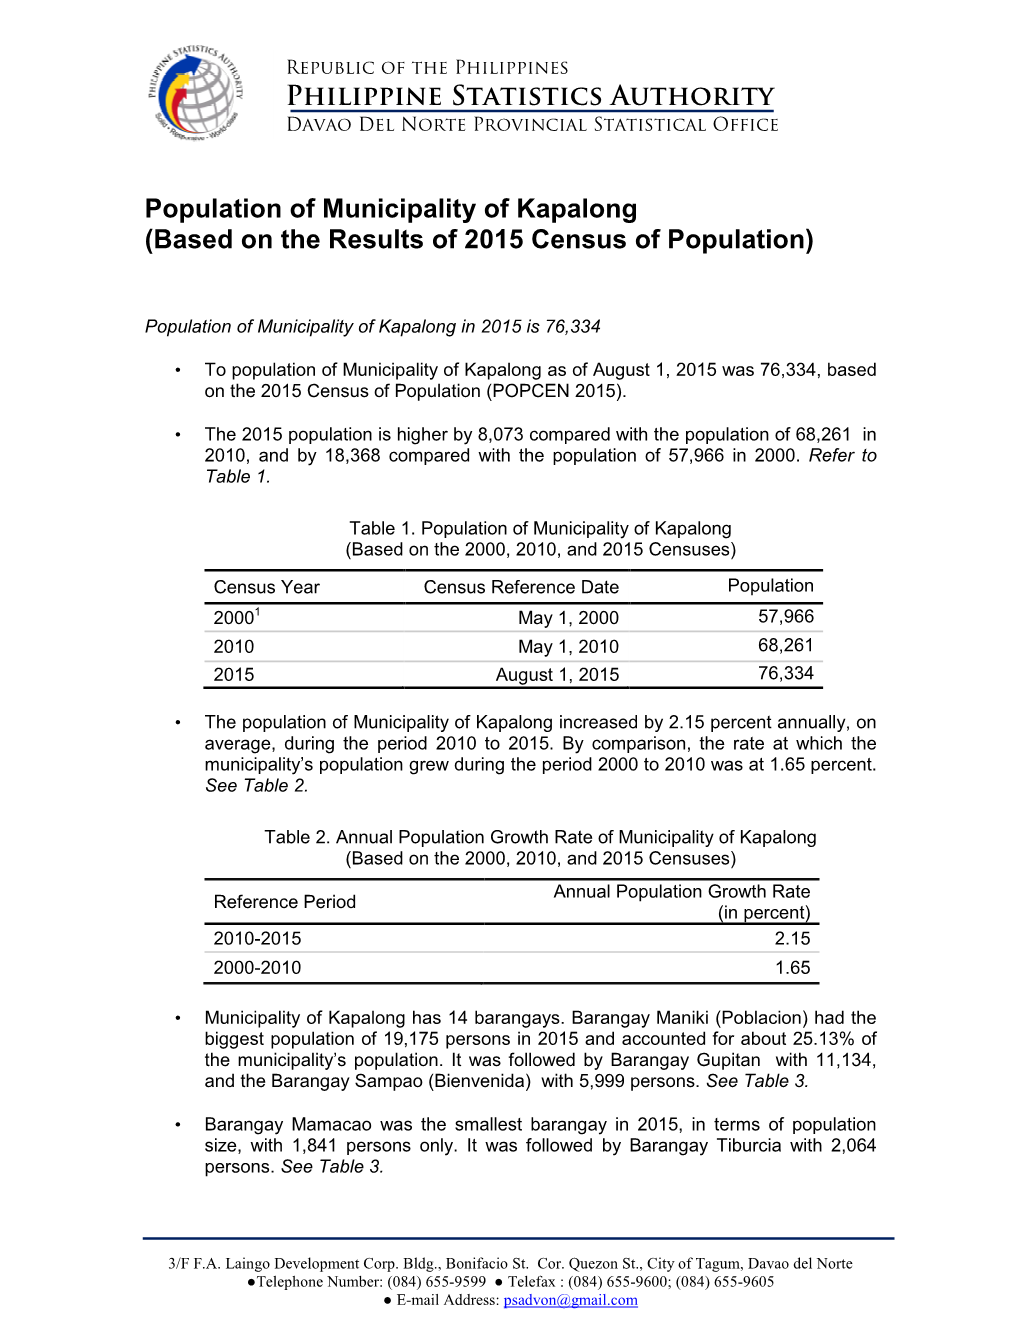 Population of Municipality of Kapalong (Based on the Results of 2015 Census of Population)